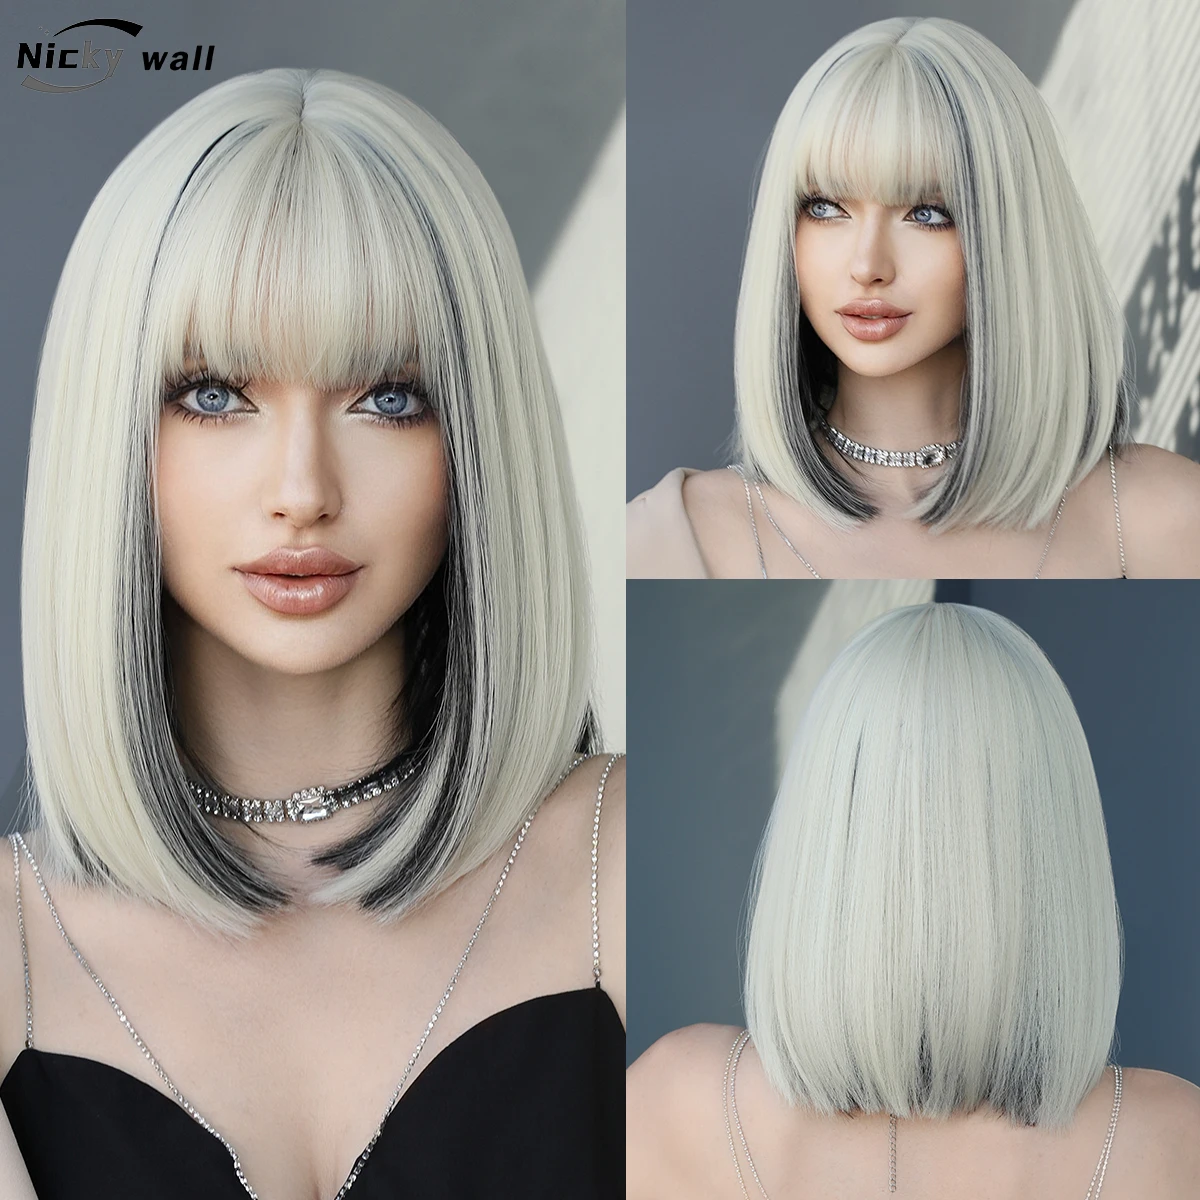 Light Blonde Bob Wigs for Women Short Platinum Wig with Bangs Natural Fashion Synthetic Wig Daily Party Halloween Fake Hair